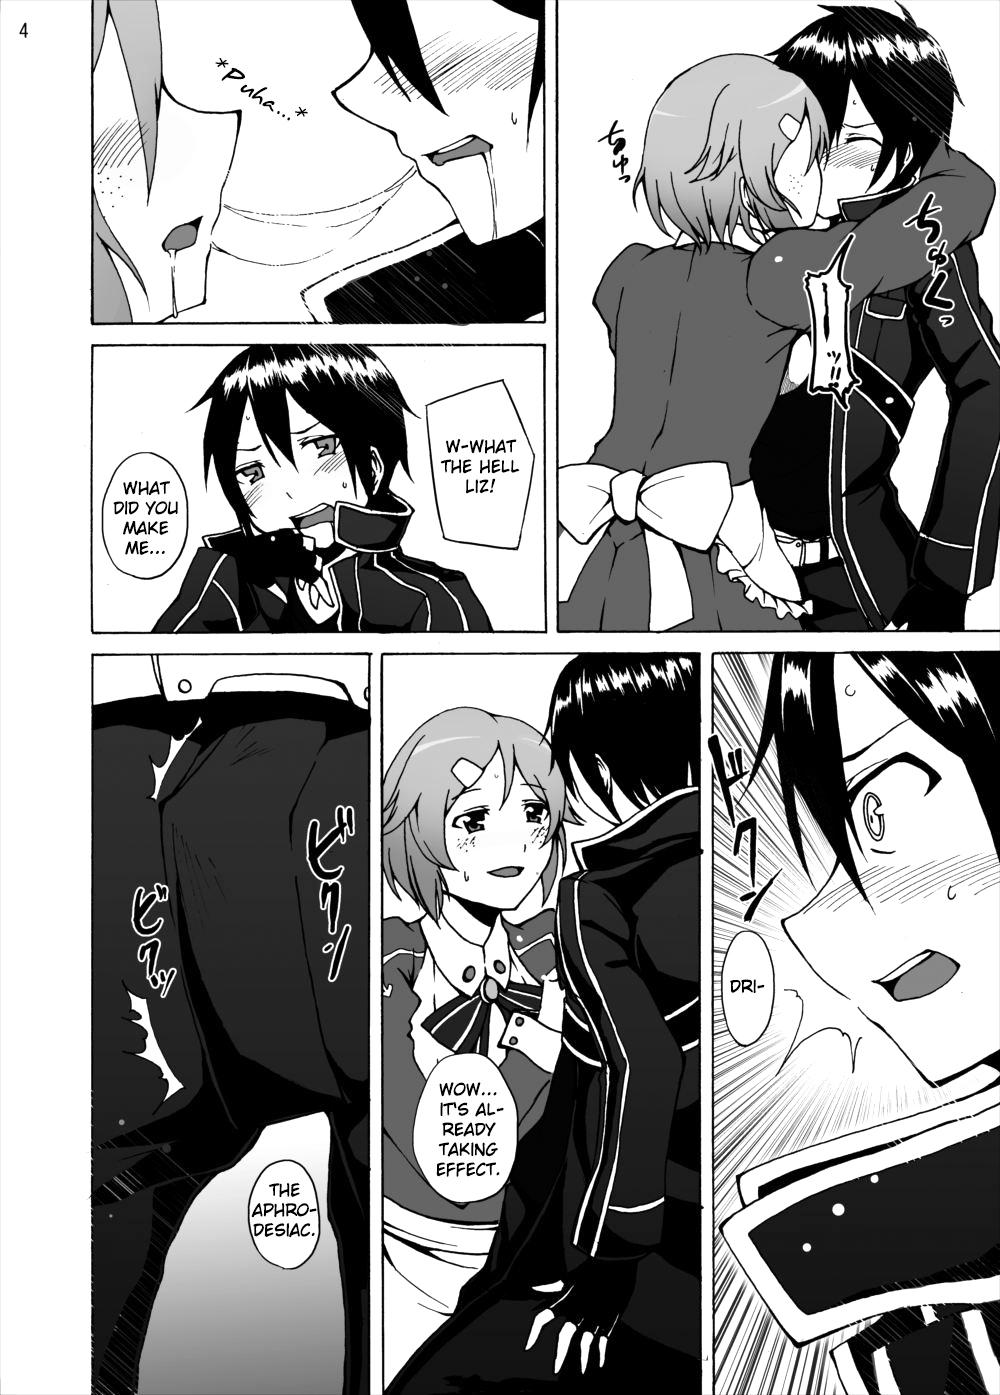 Assfucking Lisbeth's Decision...To Steal Kirito From Asuna Even if She Has to Use a Dangerous Drug - Sword art online European Porn - Page 4